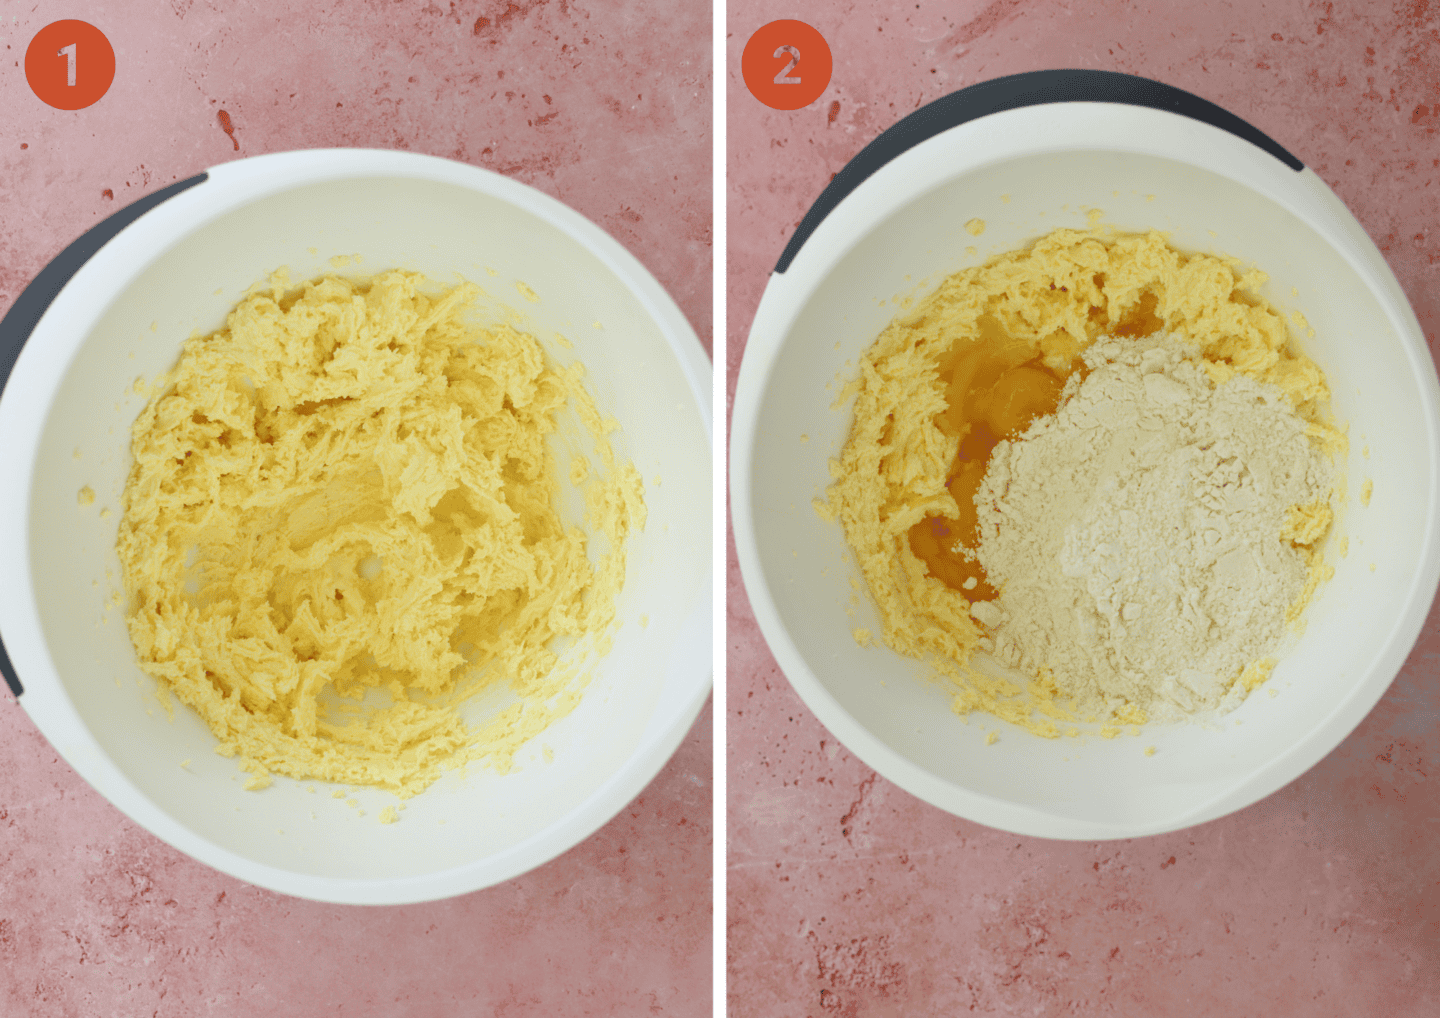 gluten free marble cake step by step photos showing creaming the butter then adding all ingredients.